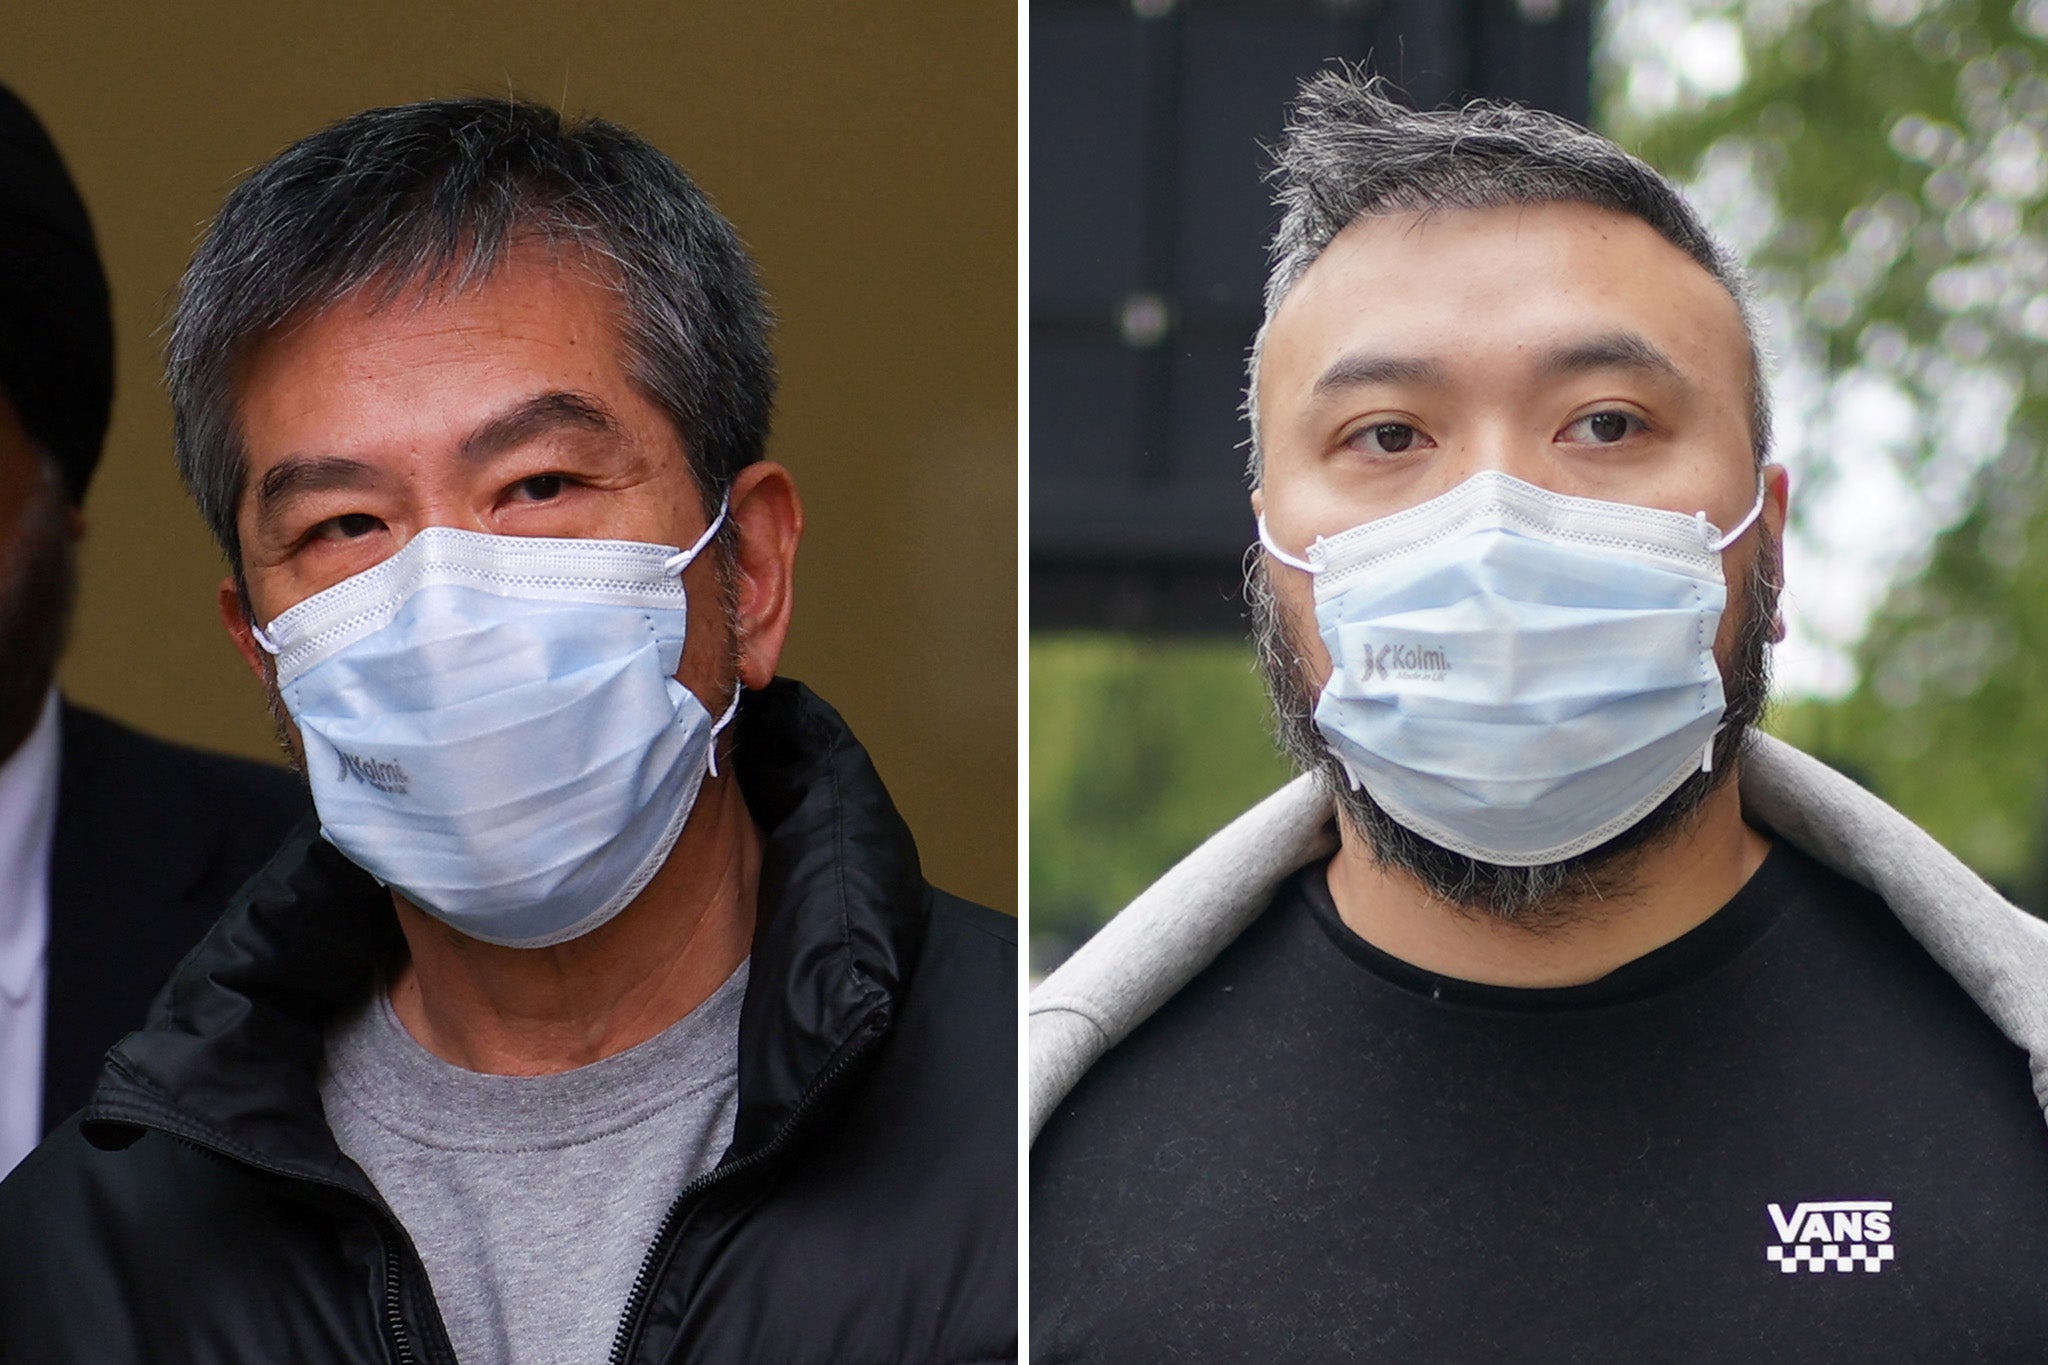 Chung Biu Yuen (left) and Chi Leung Wai (right) leave Westminster Magistrates’ Court, central London